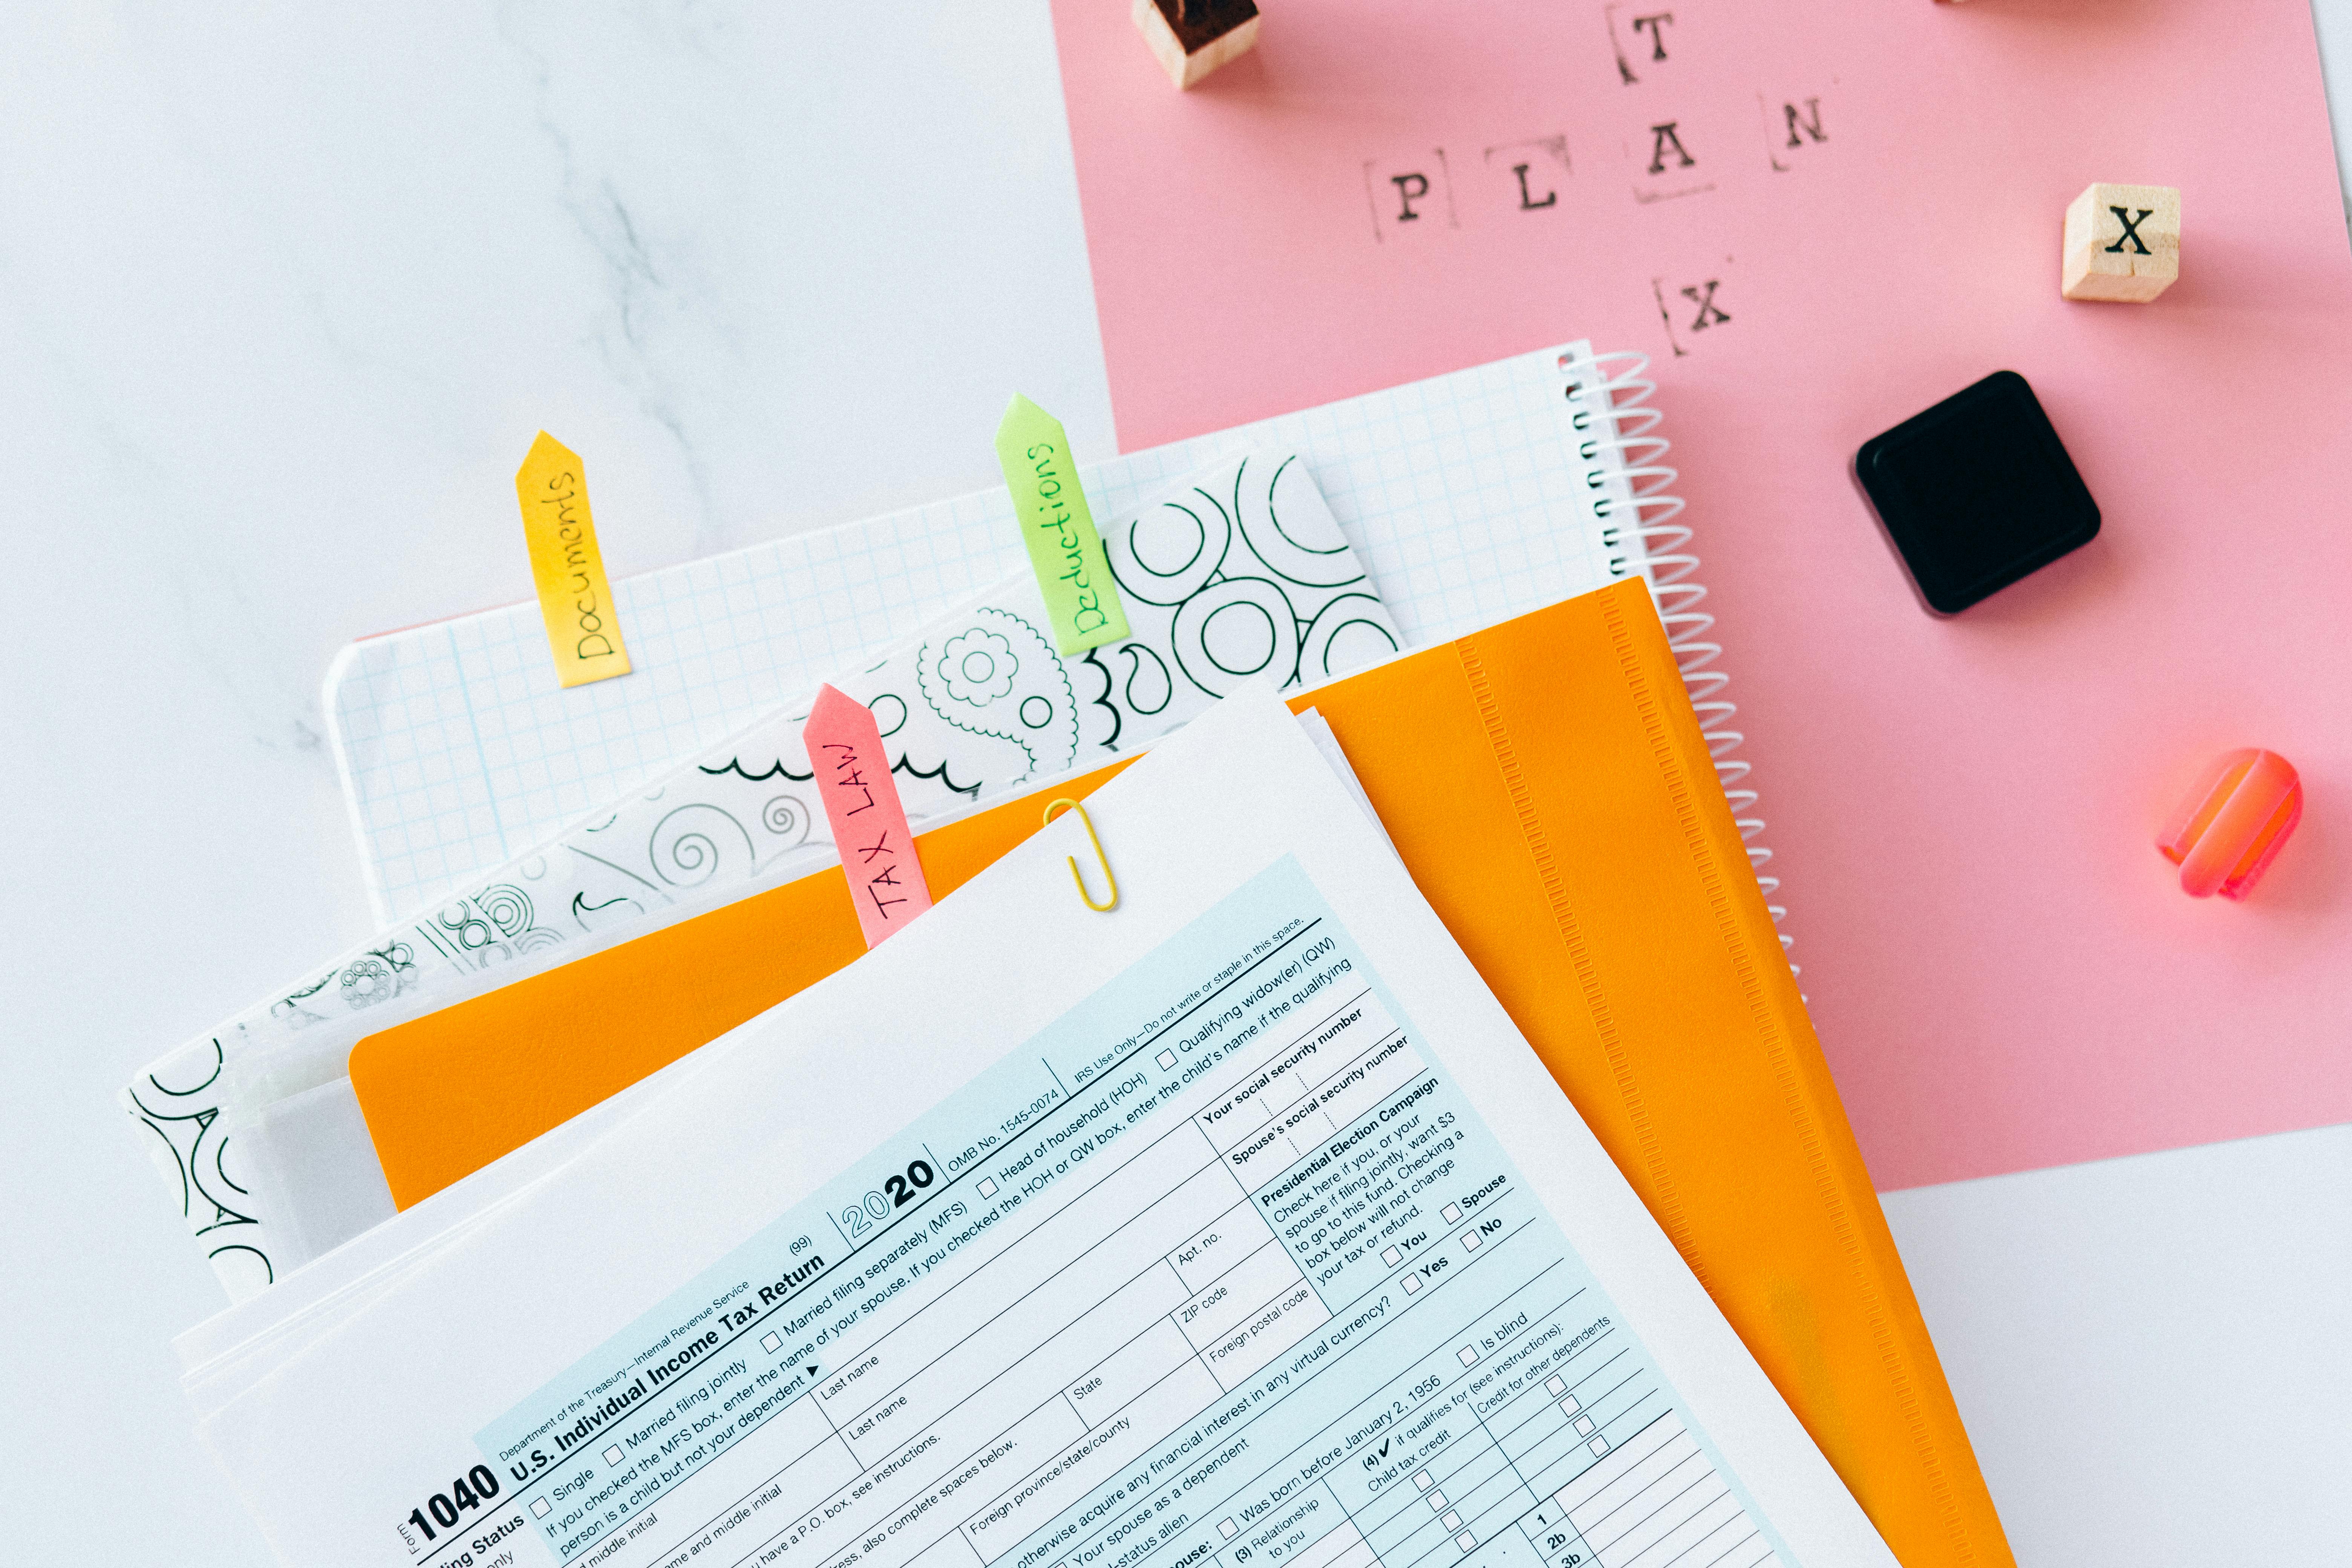 Tax Return Form and 2021 Planner on the Table \u00b7 Free Stock Photo